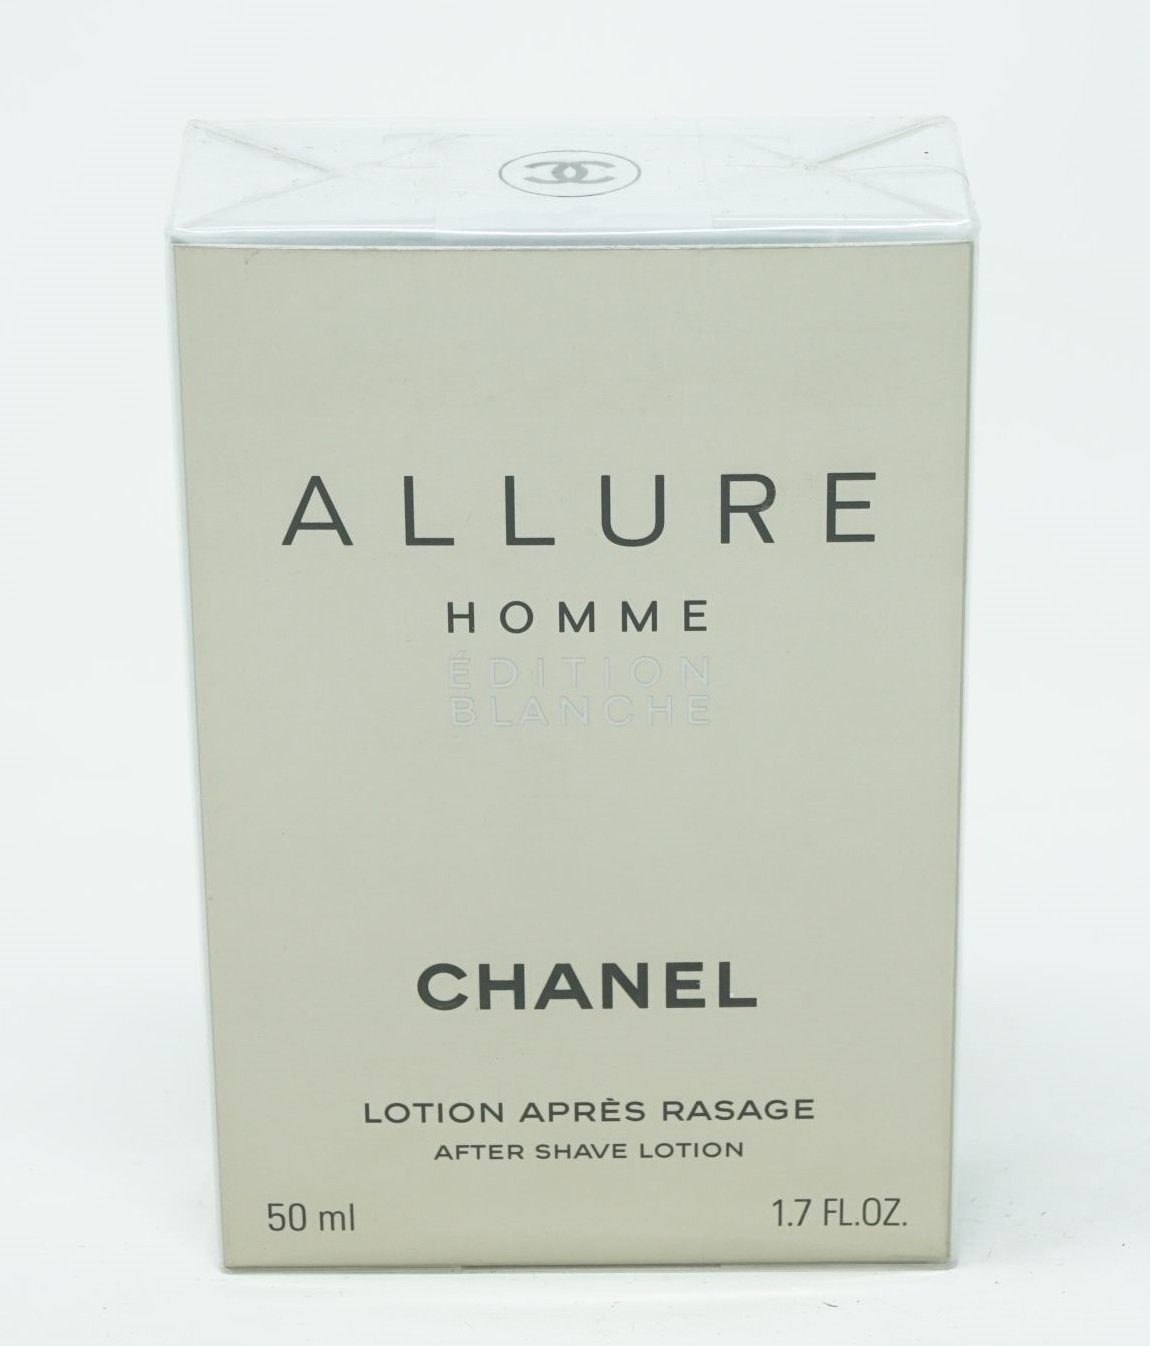 CHANEL After Shave Lotion Chanel Allure Homme Edition Blanche After Shave Lotion 50 ml